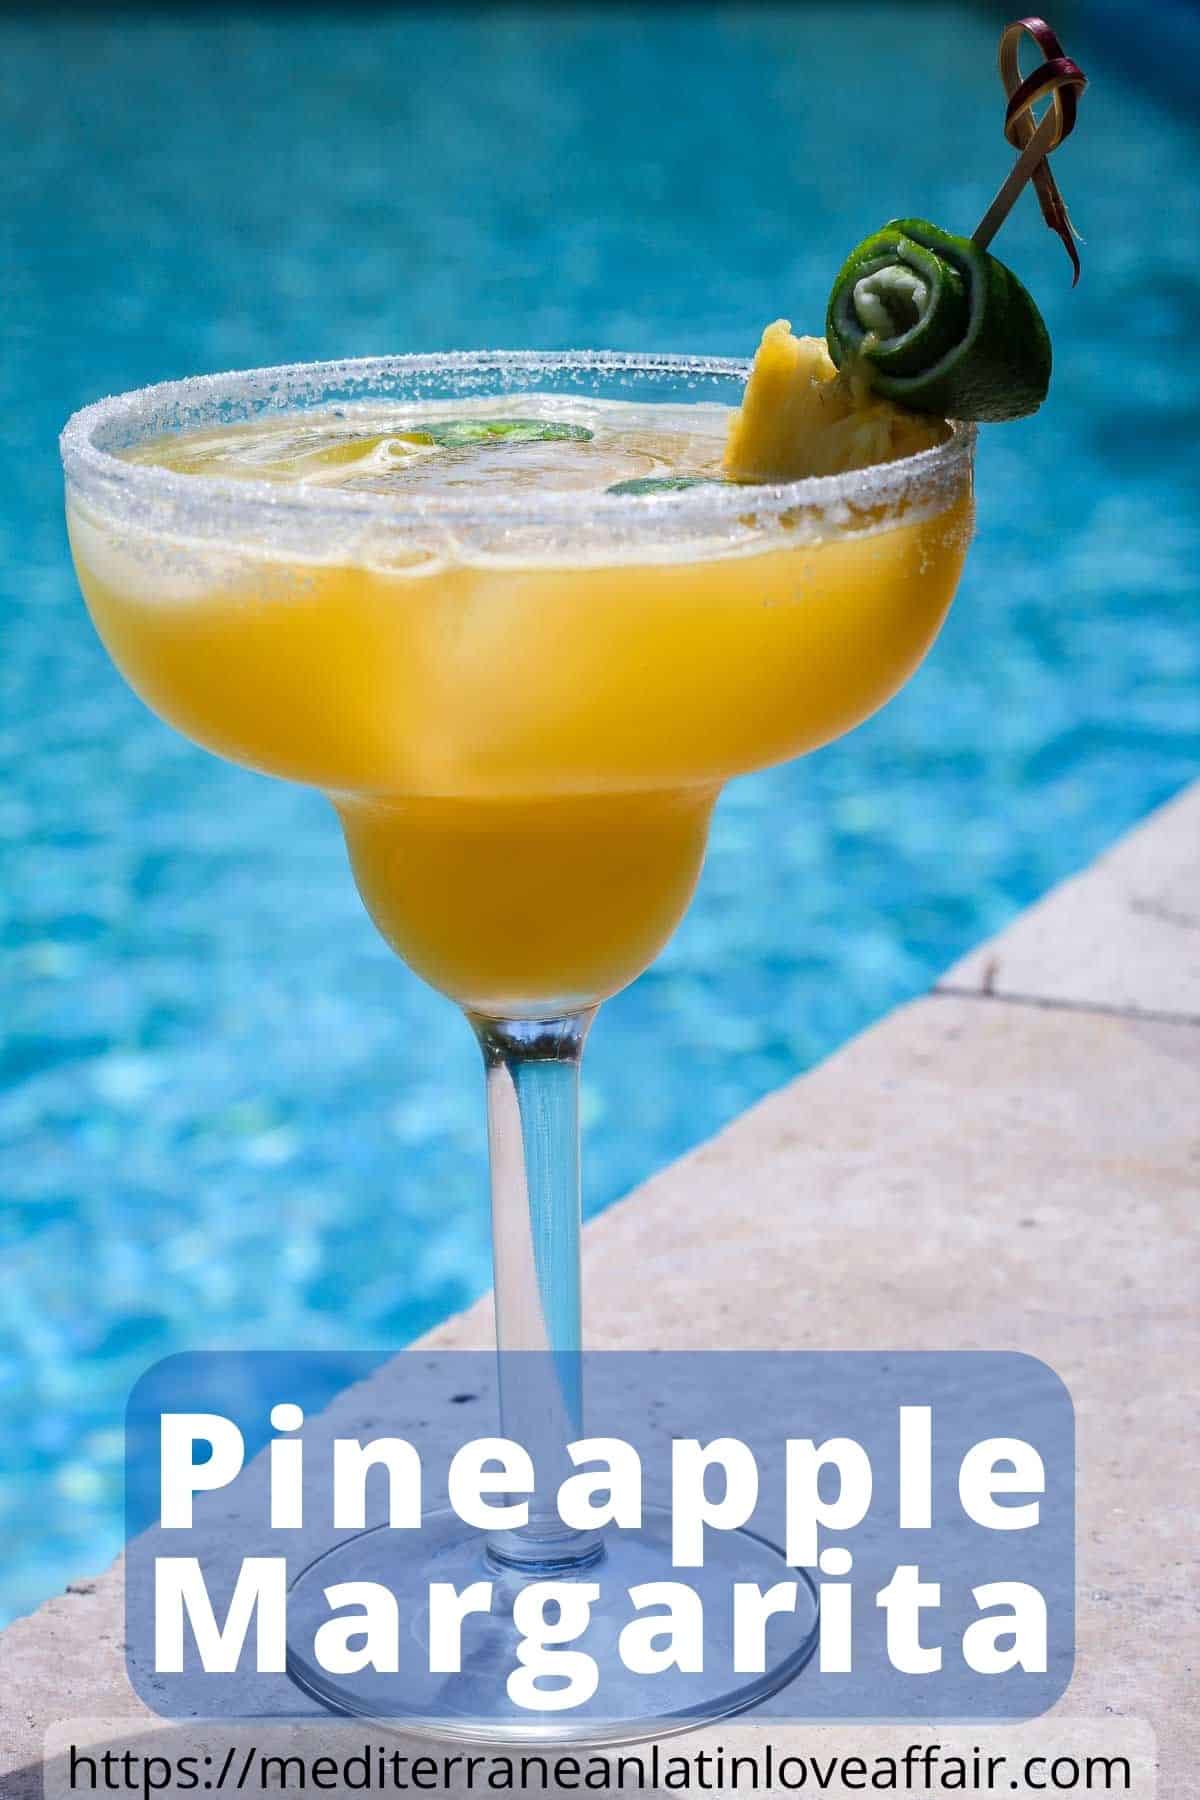 An image prepared for Pinterest, it shows a margarita glass next to the pool. Glass is garnished with pineapple and lime, while slices of jalapenos are seen floating on the drink. 